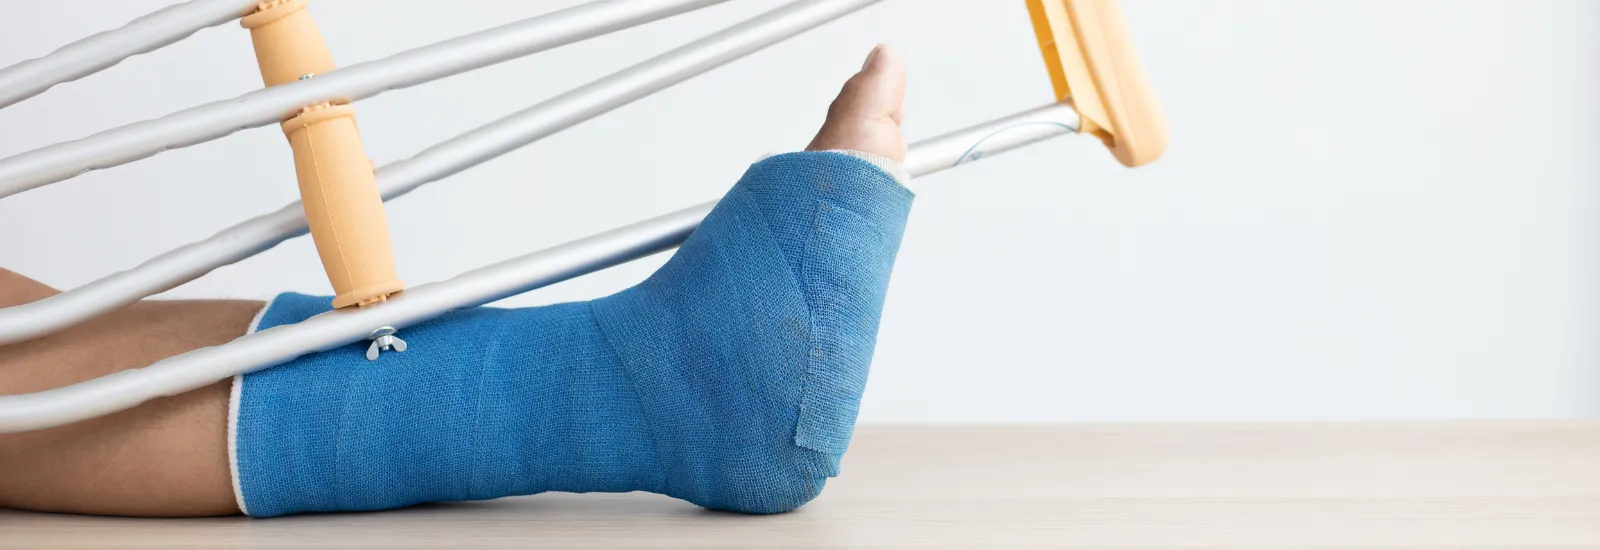 Wiggling fingers in a cast - Virtual Hand Care